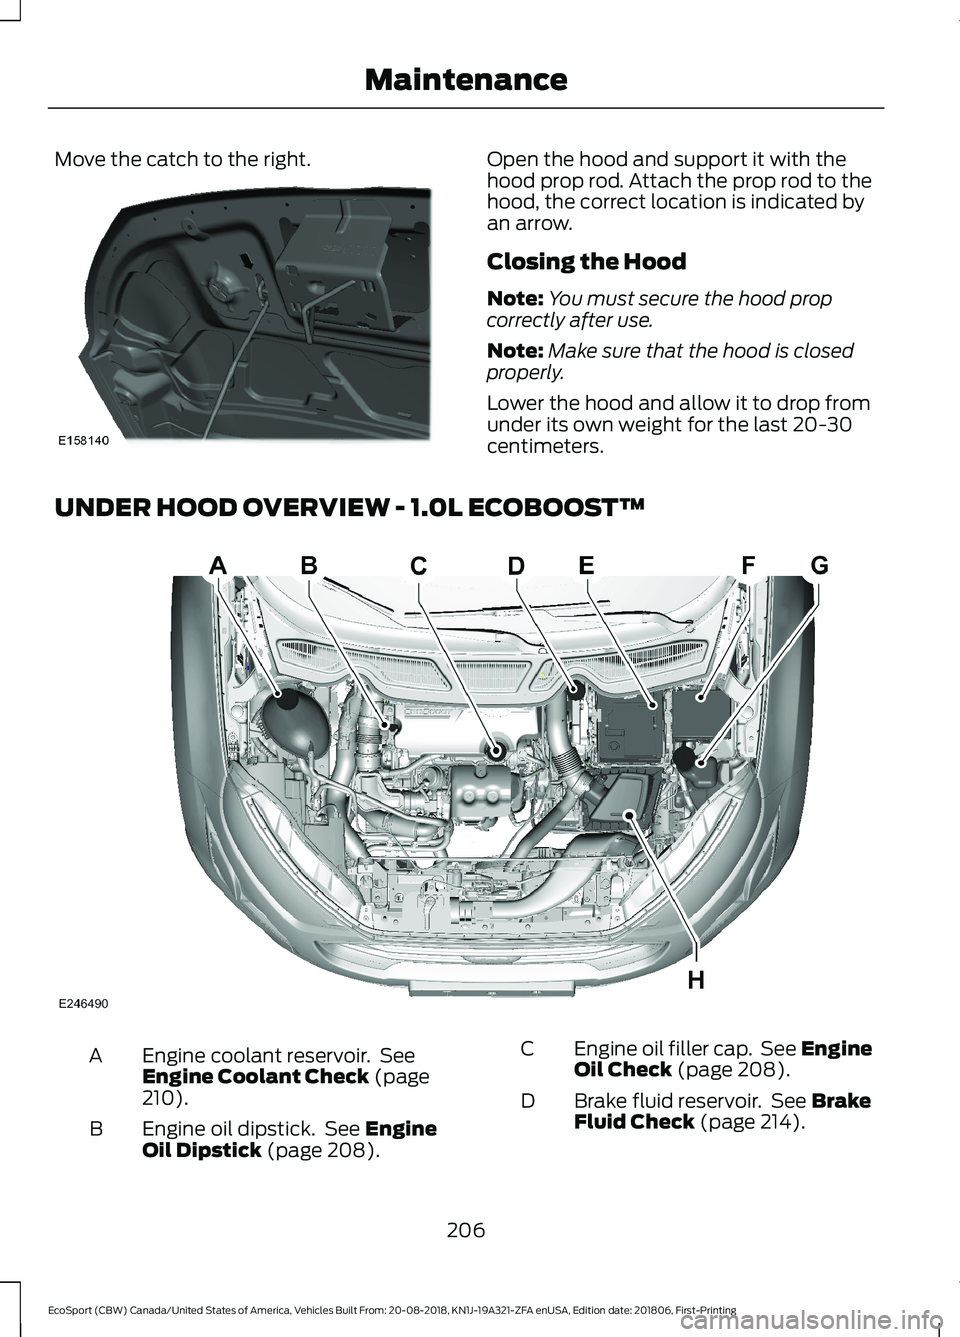 FORD ECOSPORT 2019  Owners Manual Move the catch to the right.Open the hood and support it with thehood prop rod. Attach the prop rod to thehood, the correct location is indicated byan arrow.
Closing the Hood
Note:You must secure the 